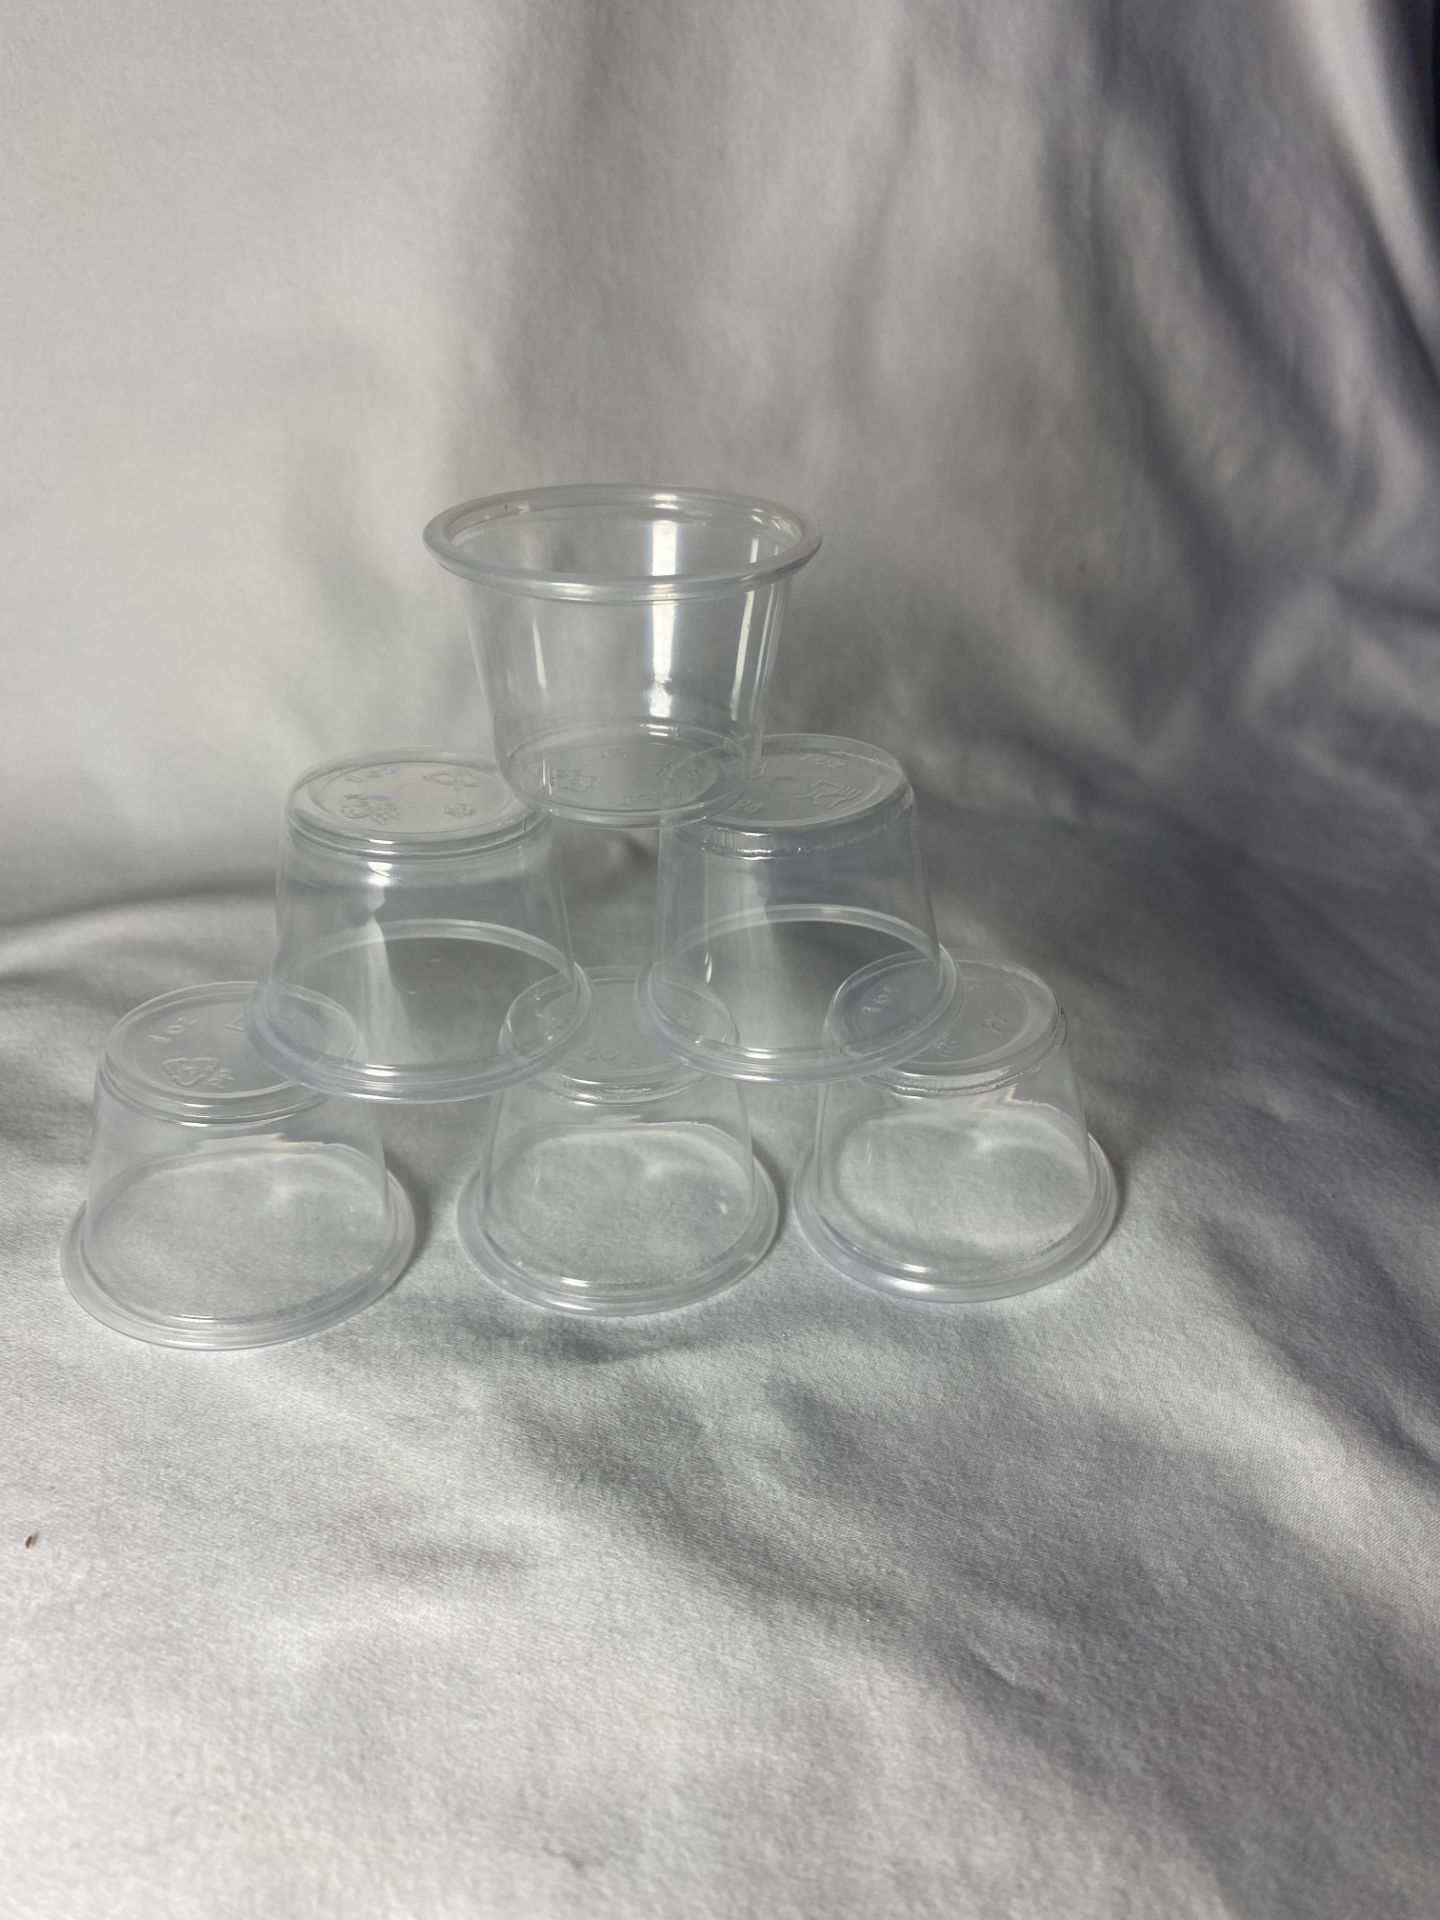 5 x Box of Portion Cups & 5 Box of Lids by Value Choice - Image 3 of 4